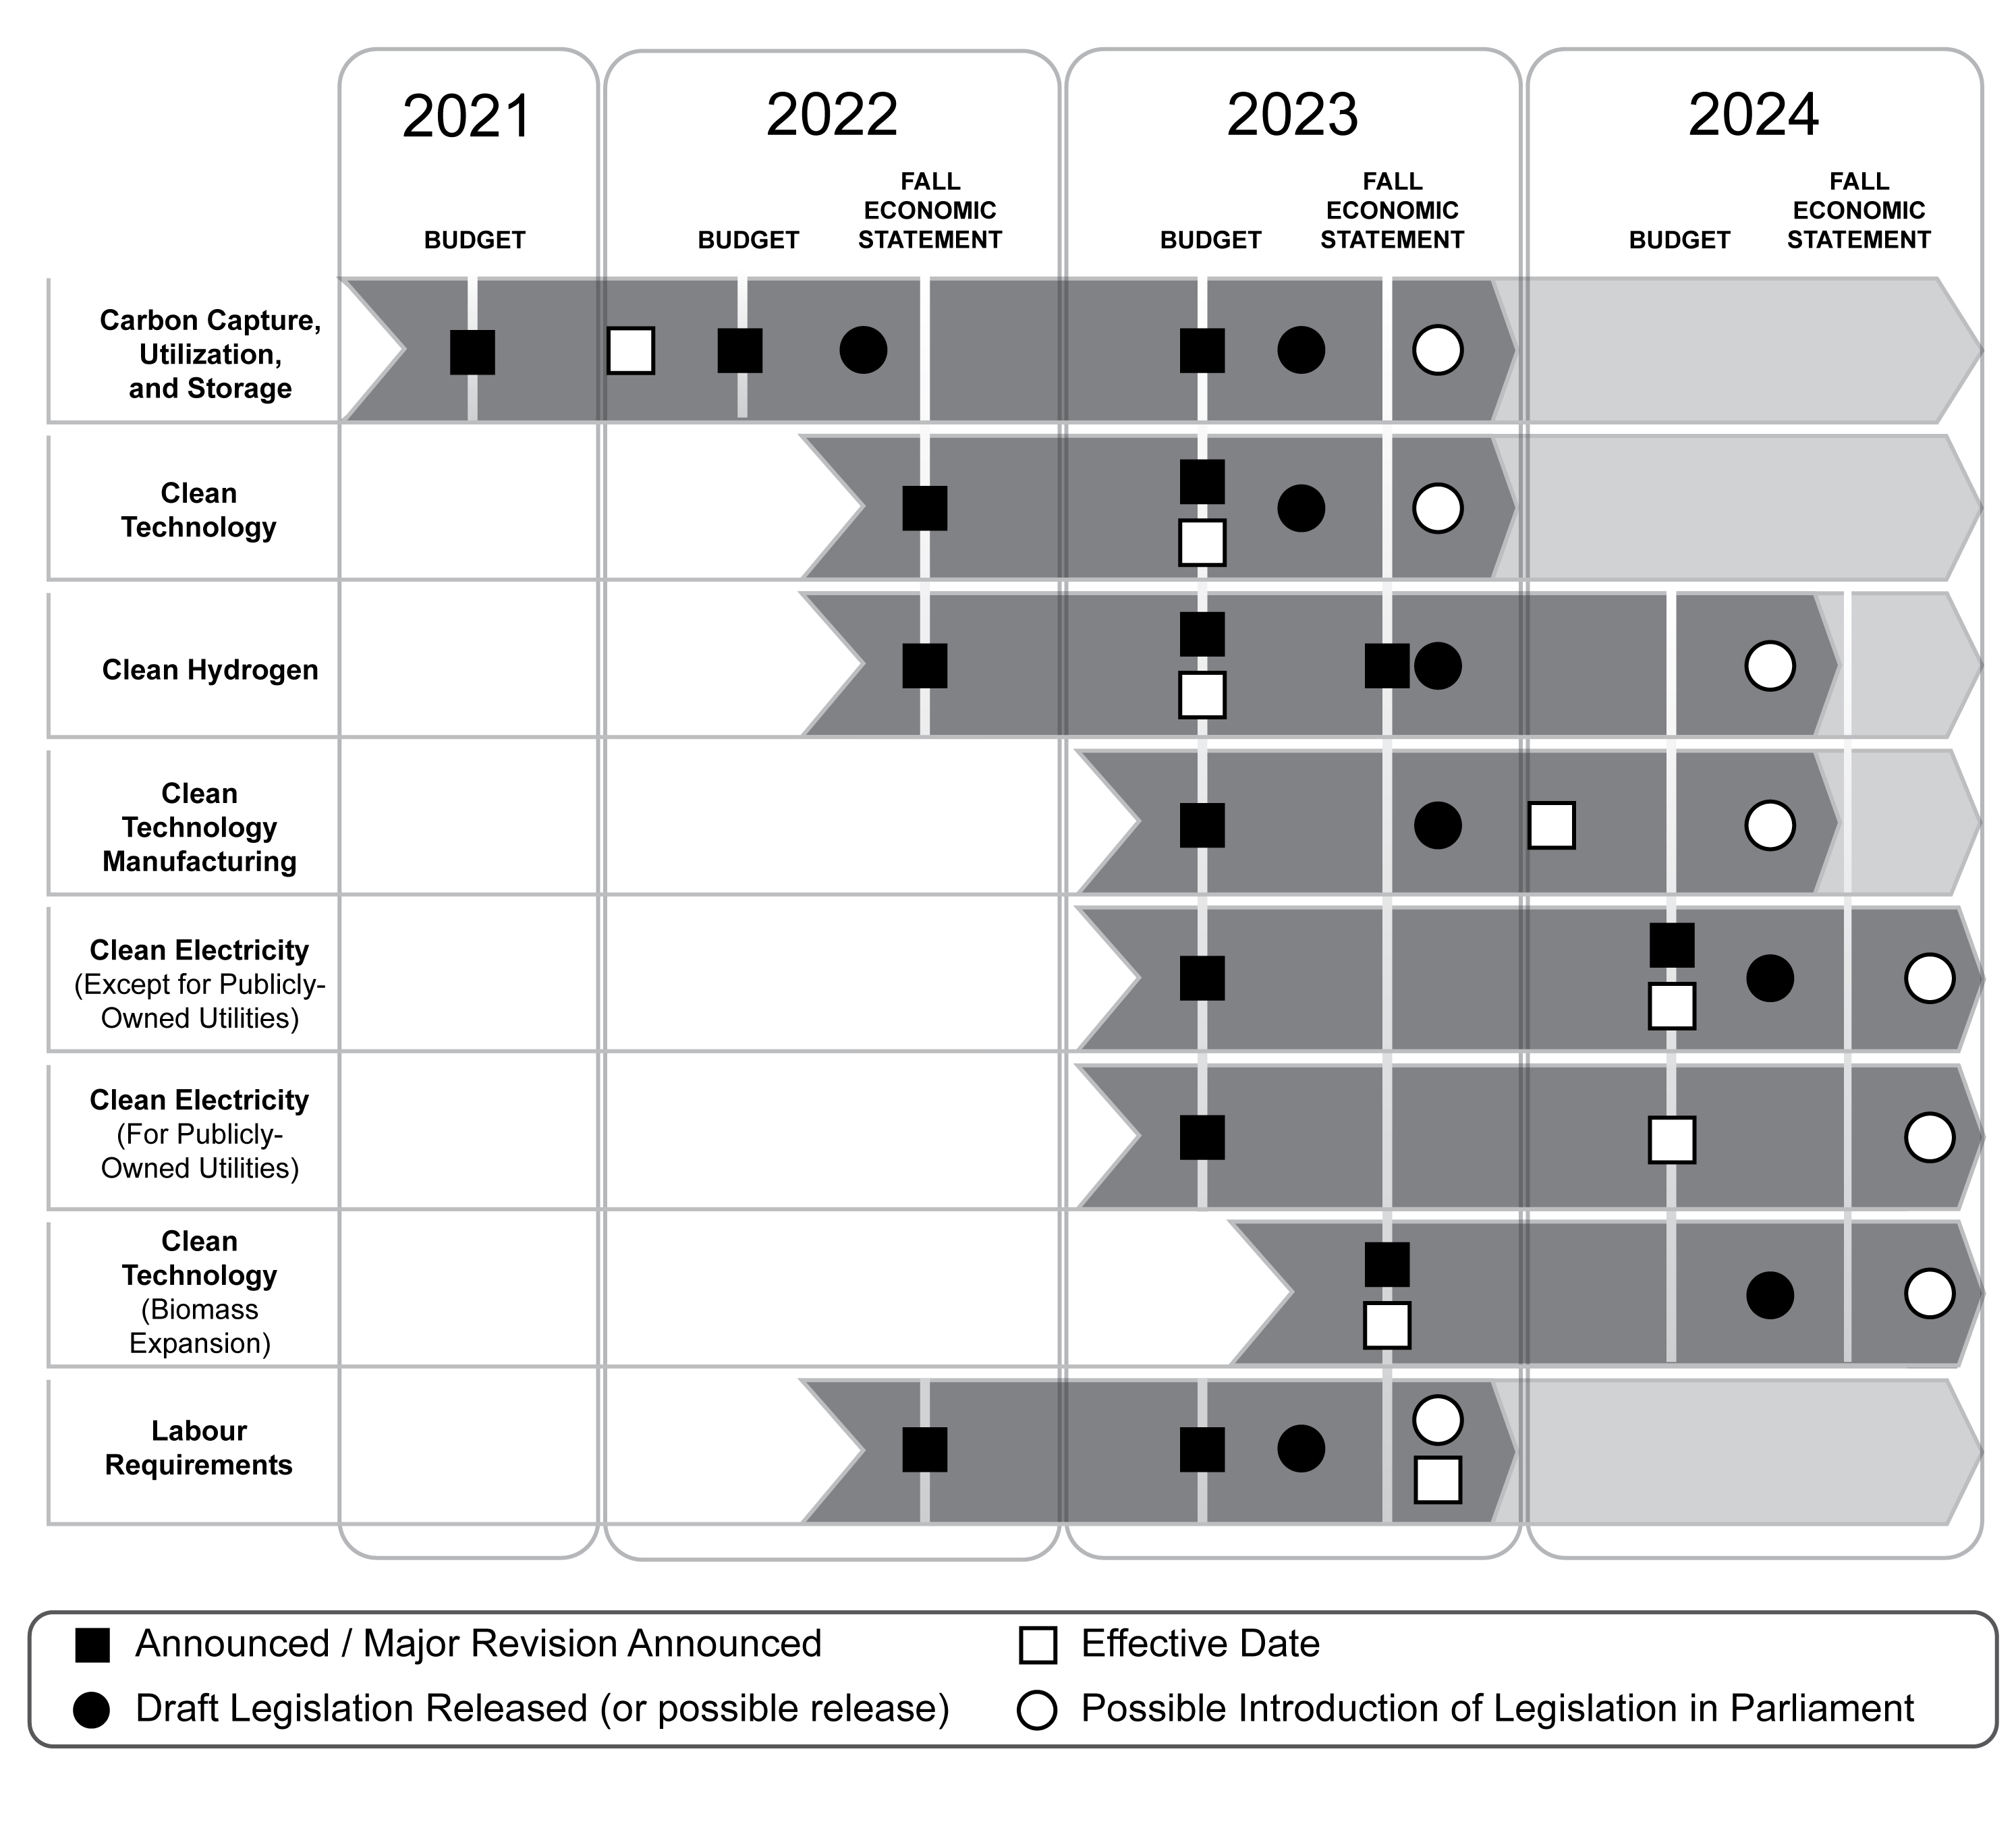 Figure 3.3: Delivery  and Implementation Timeline for Investment Tax Credits